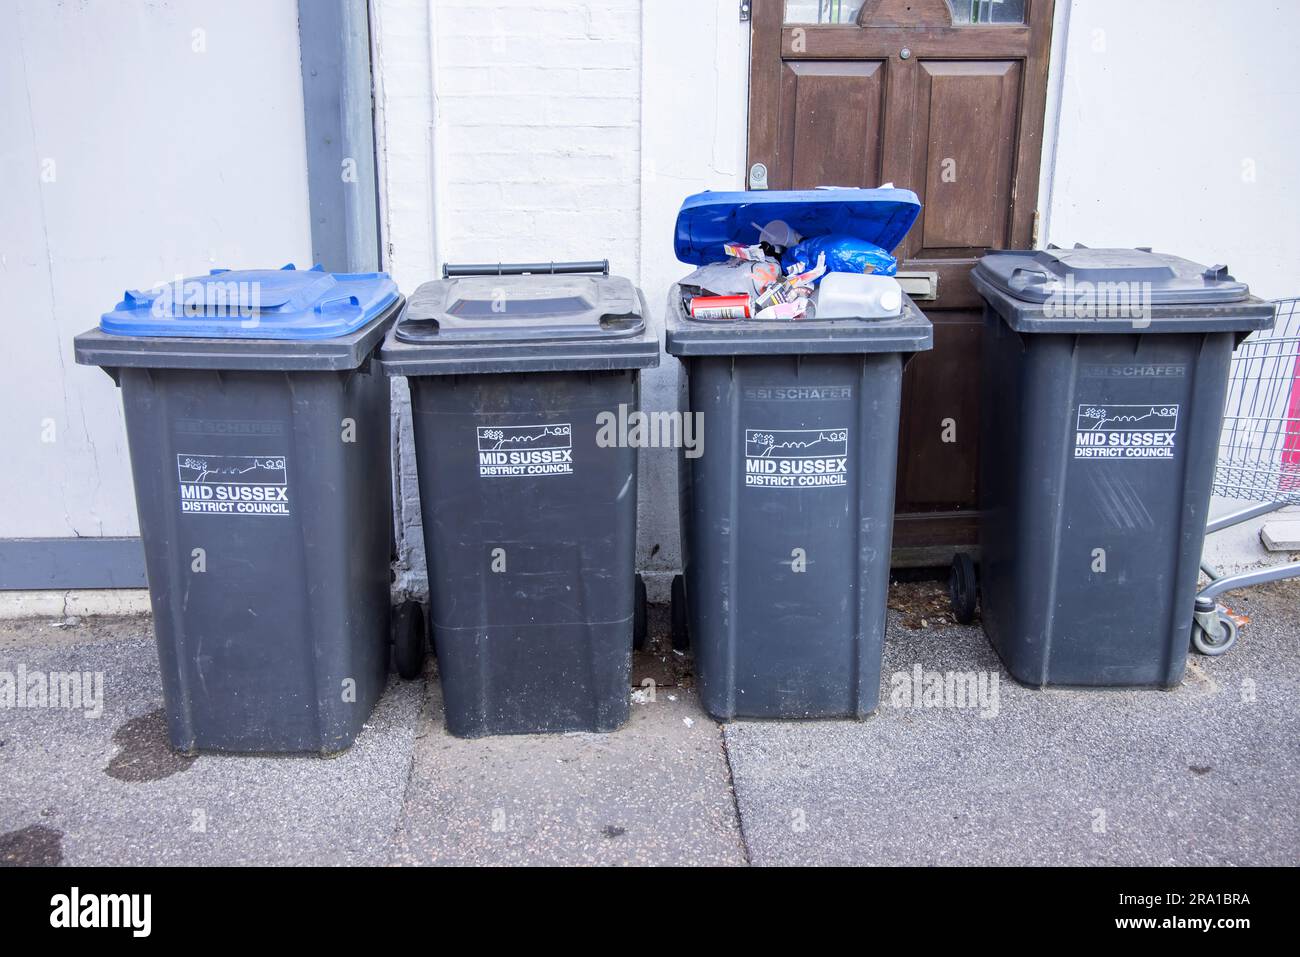 overflowing rubbish bins in Burgess hill Mid Sussex Stock Photo